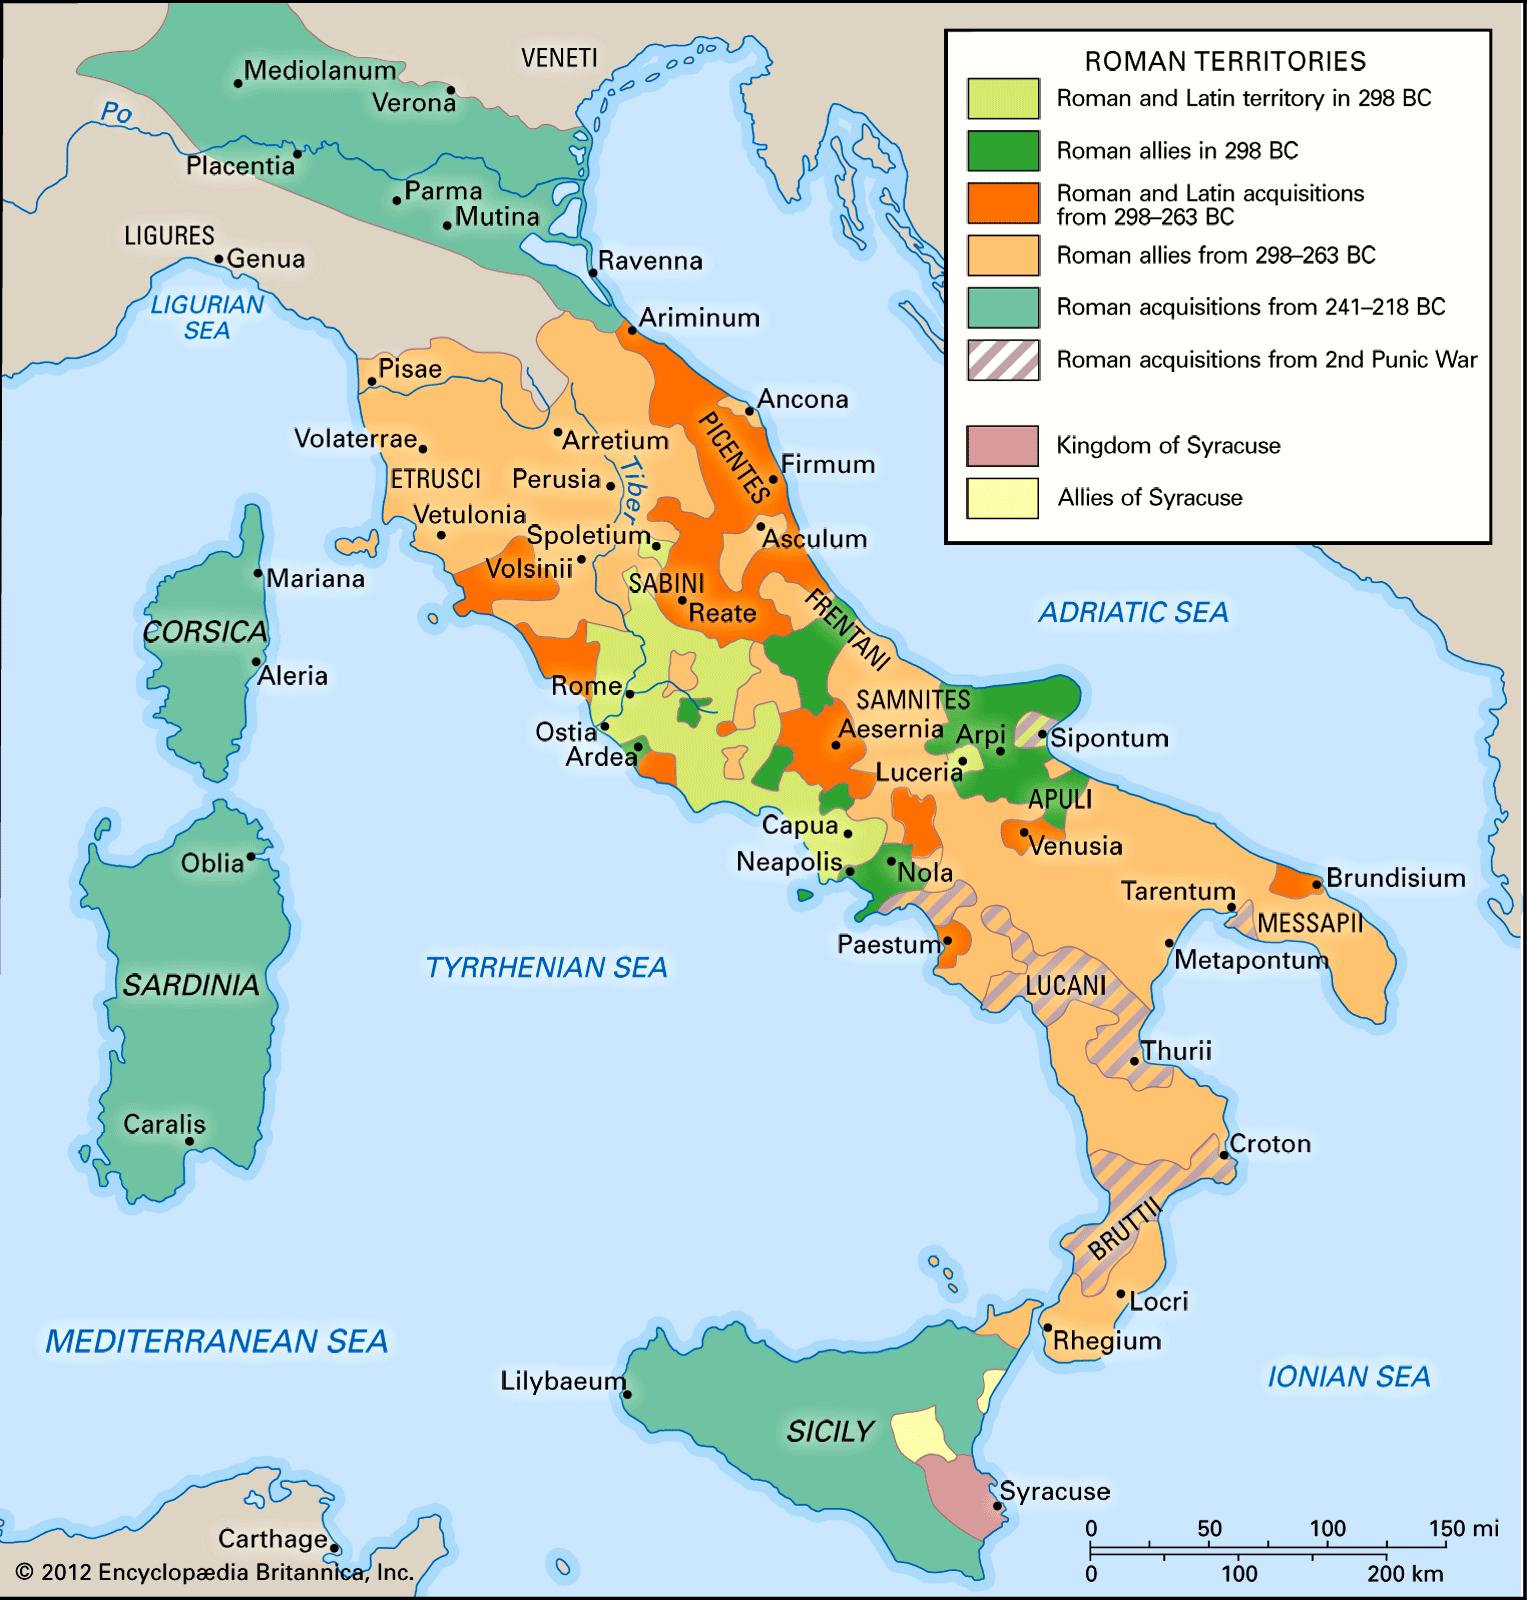 old-map-of-italy-ancient-and-historical-map-of-italy